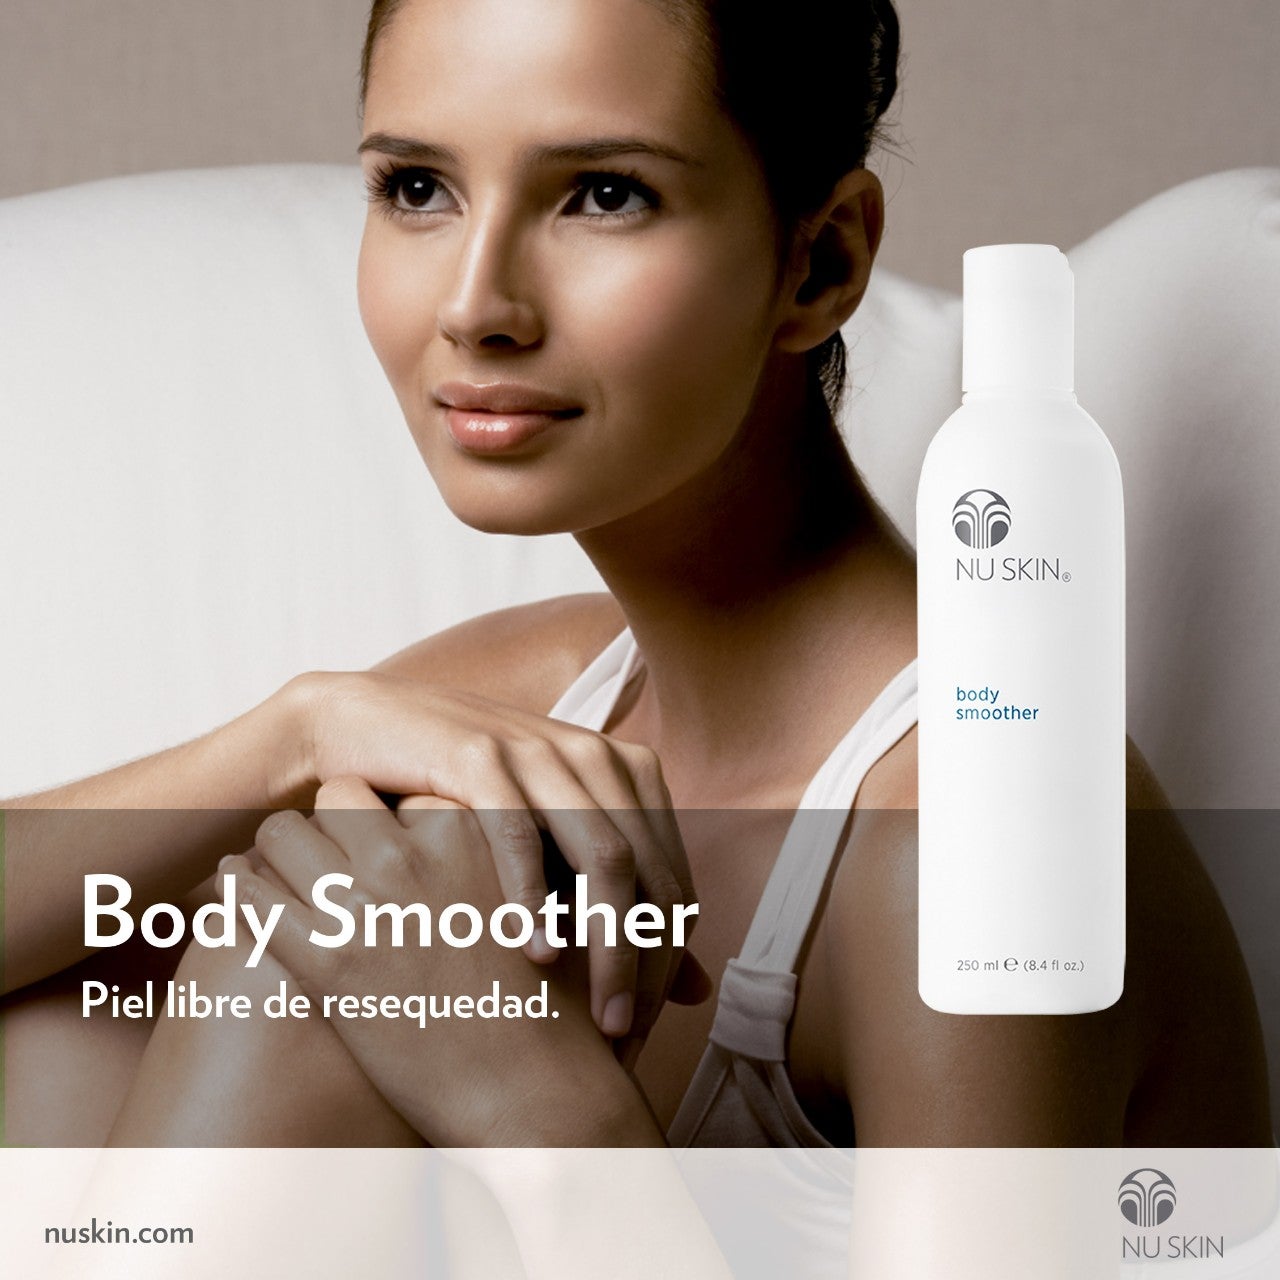 Body-Smoother_8-ar